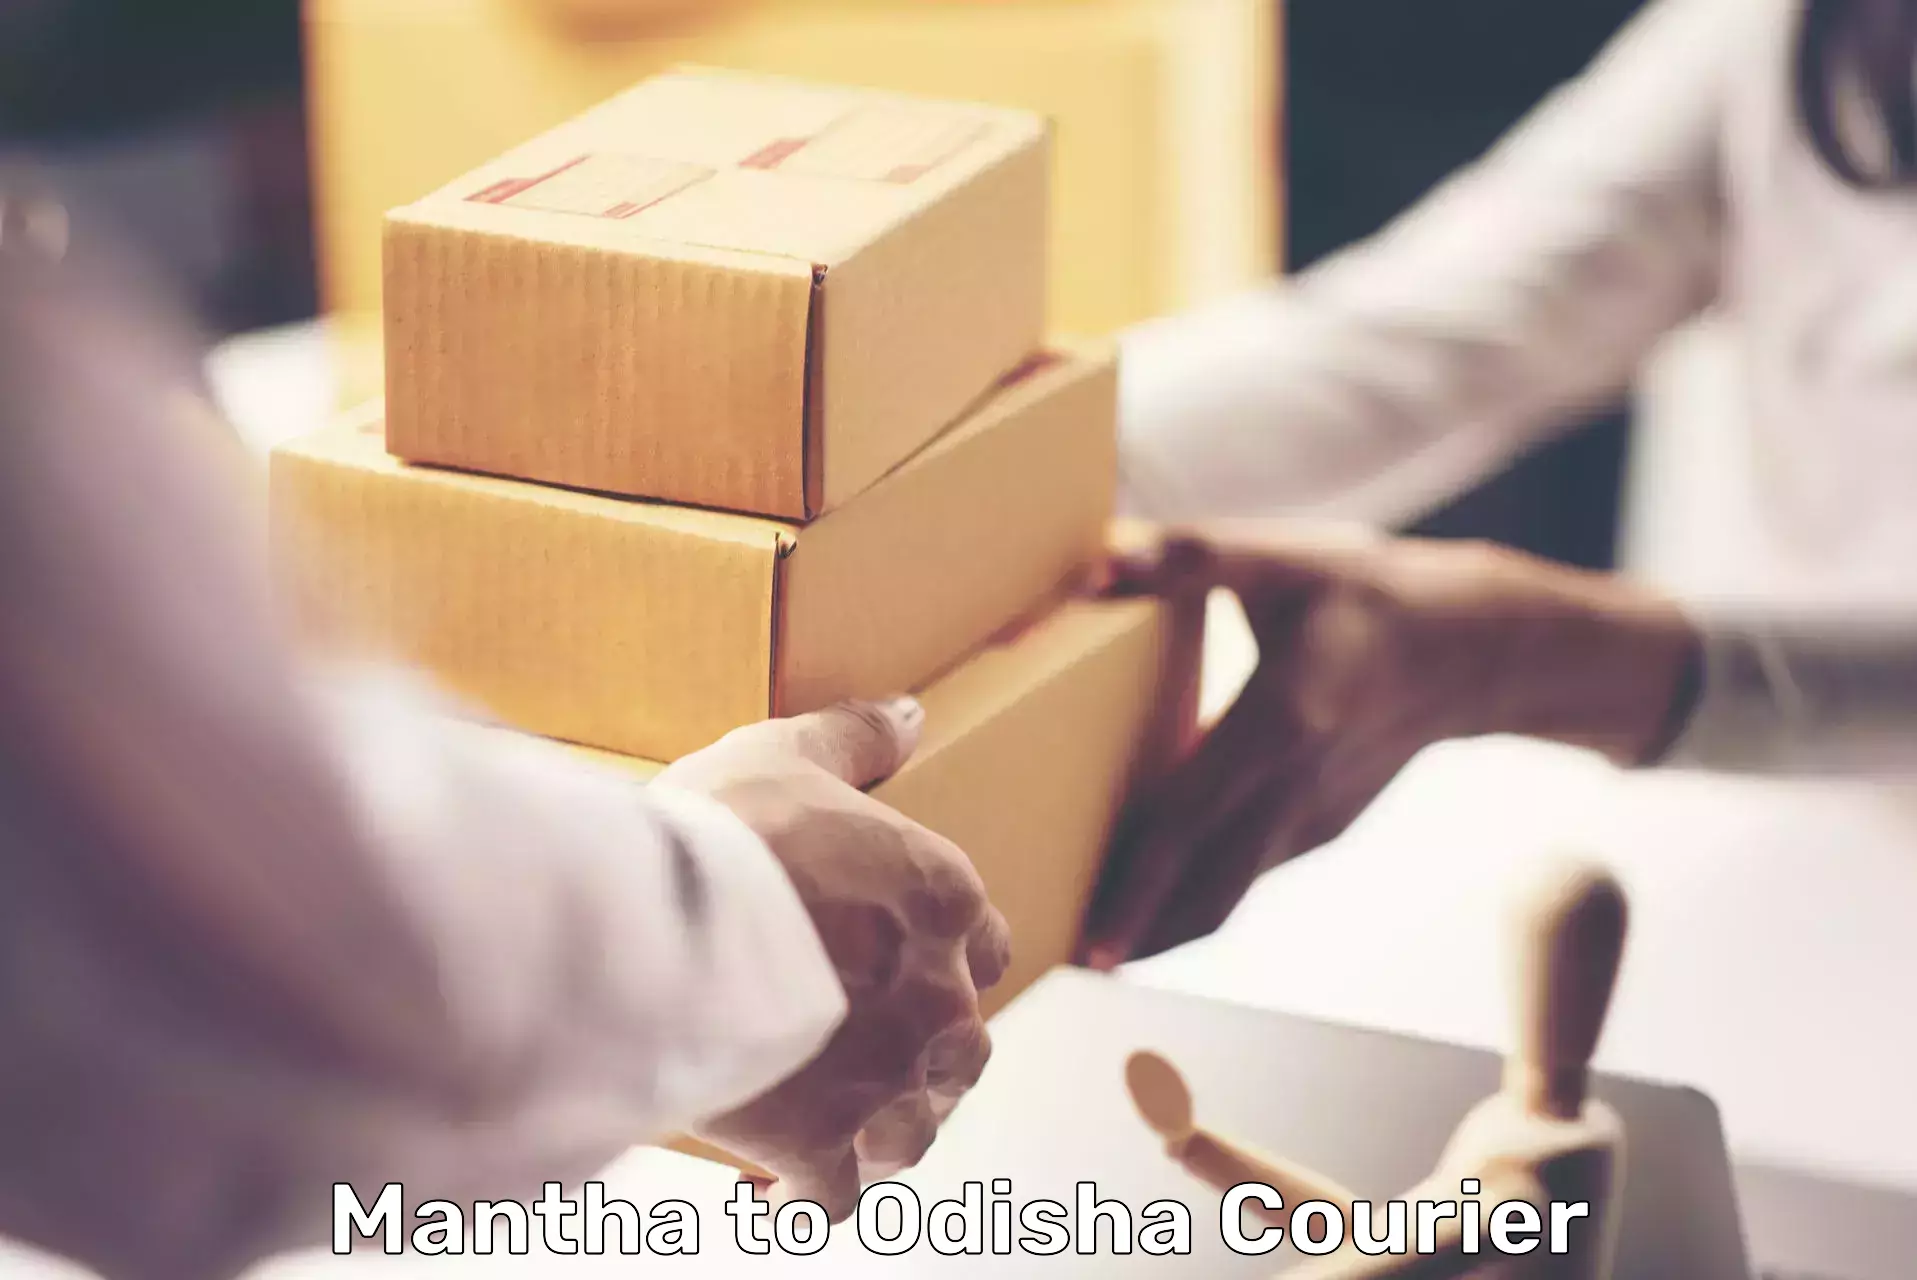 Efficient order fulfillment Mantha to Anandapur